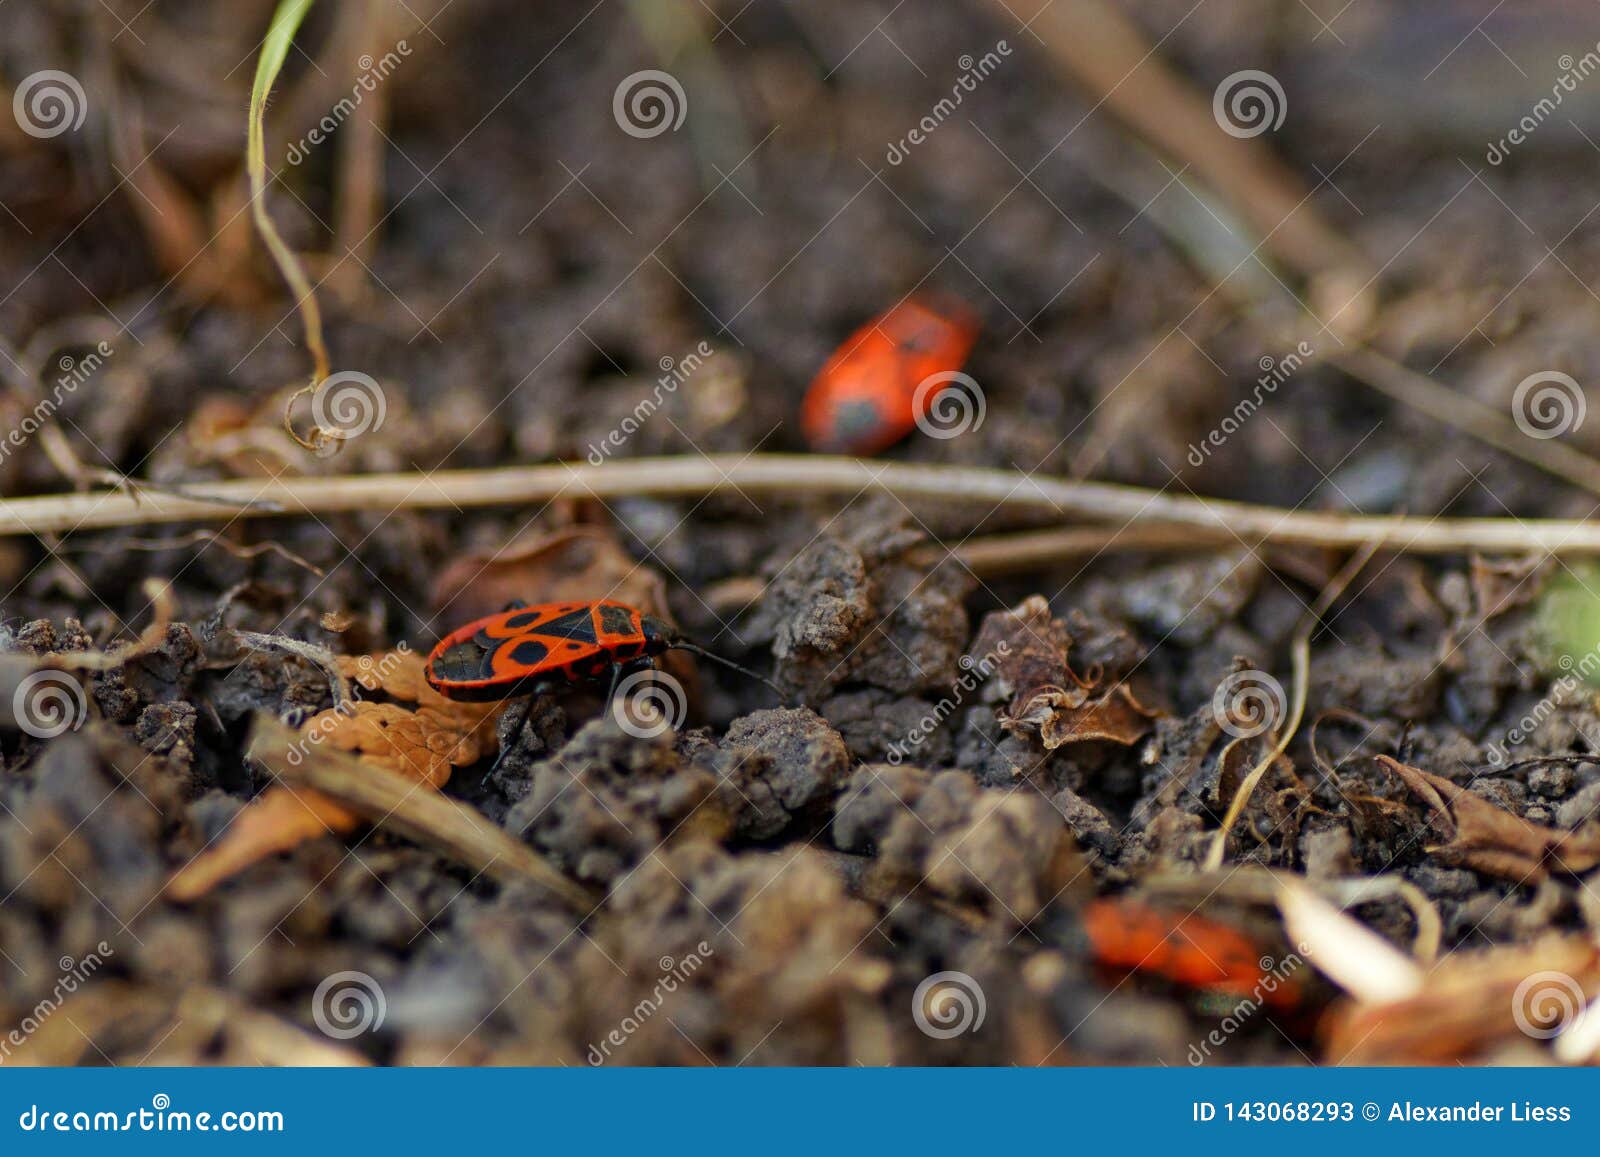 Red Bugs In The Garden In Spring Stock Image Image Of Park